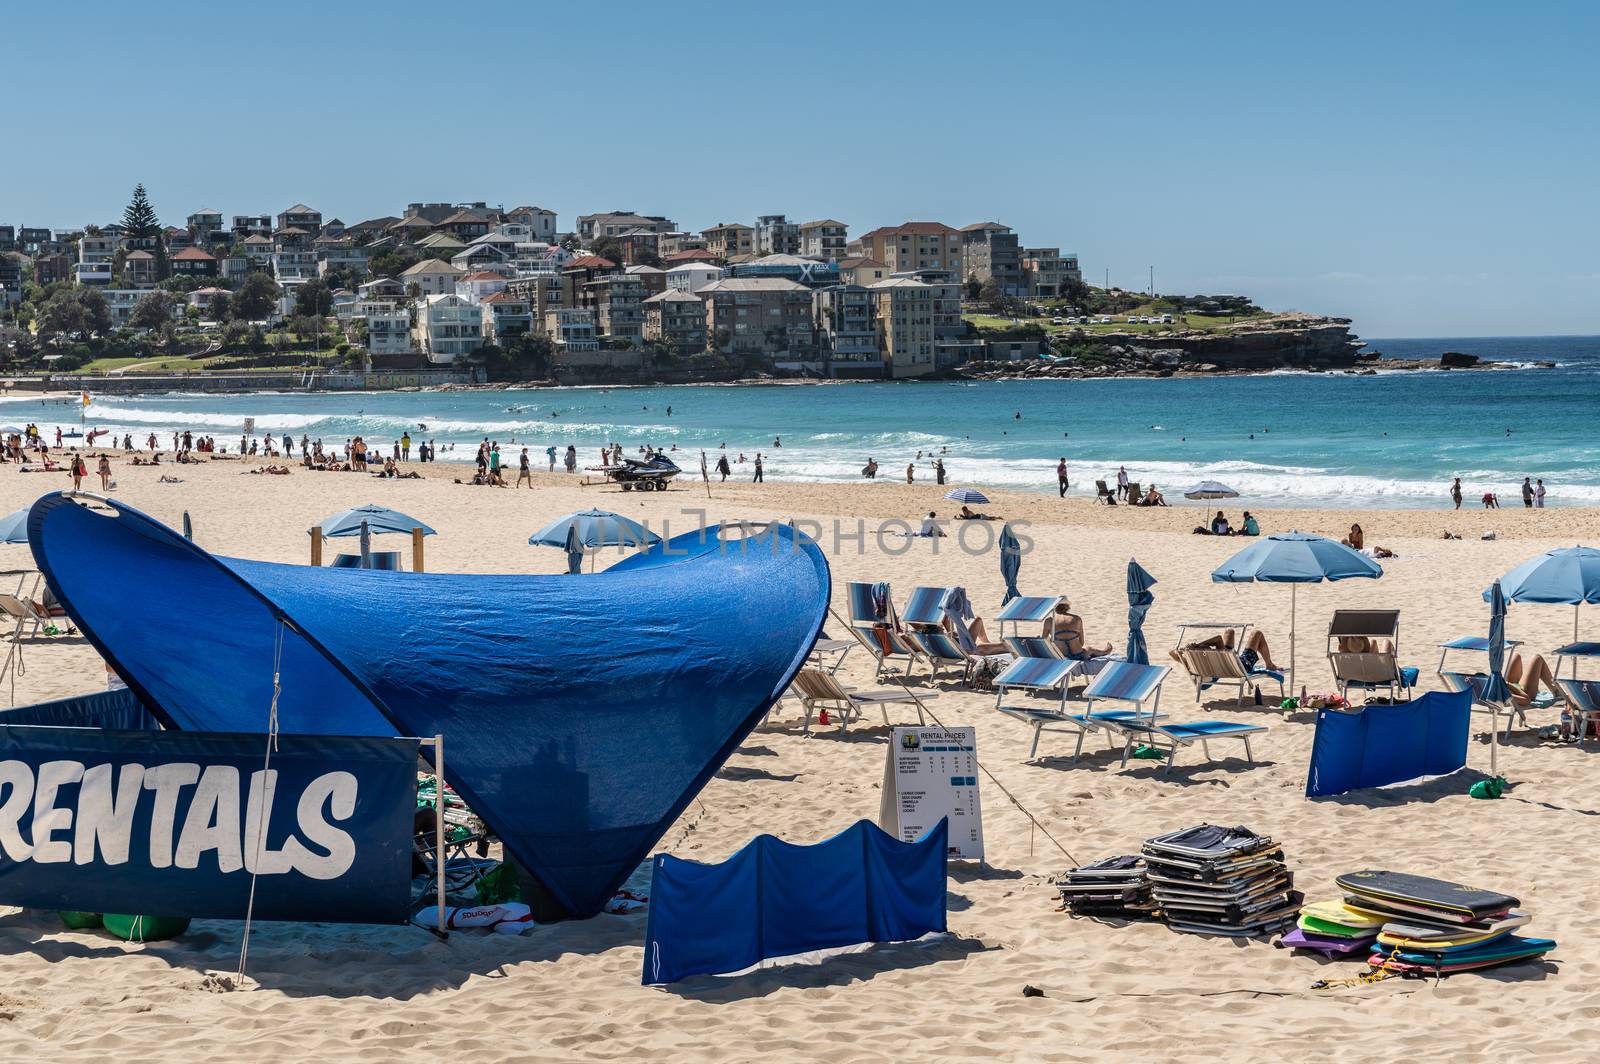 Sydney, Australia - February 11, 2019: Bondi Beach and North side cliffs with housing, under blue sky. Pale yellow sand with people, blue umbrellas and  beach beds and folding chairs in front, blue water.